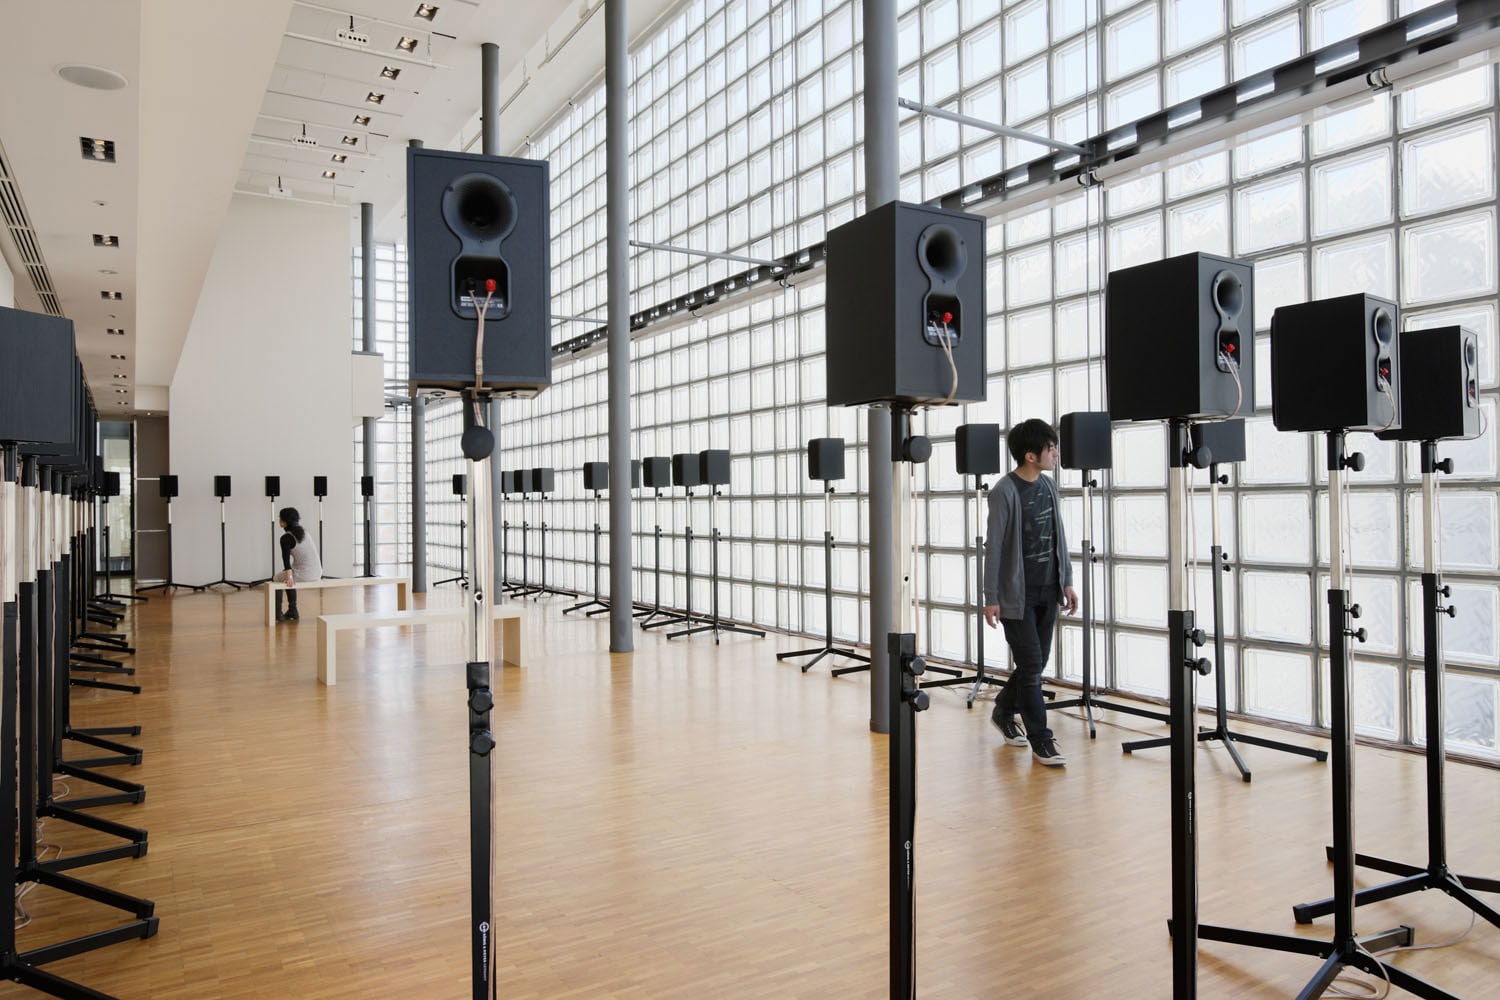 Janet Cardiff
The Forty Part Motet (A reworking of &amp;quot;Spem in Alium&amp;quot; by Thomas Tallis 1556), 2001
40 loud speakers mounted on stands, placed in an oval, amplifiers, playback computer
Duration: 14 minute loop with 11 minutes&amp;nbsp;of music and 3 minutes&amp;nbsp;of intermission
Dimensions variable
Installation view at&amp;nbsp;Fonadation d&amp;rsquo;entreprise Herm&amp;egrave;s, Tokyo, 2009
Photo: Atsushi Nakamichi / Nac&amp;aacute;sa &amp;amp; Partners Inc.